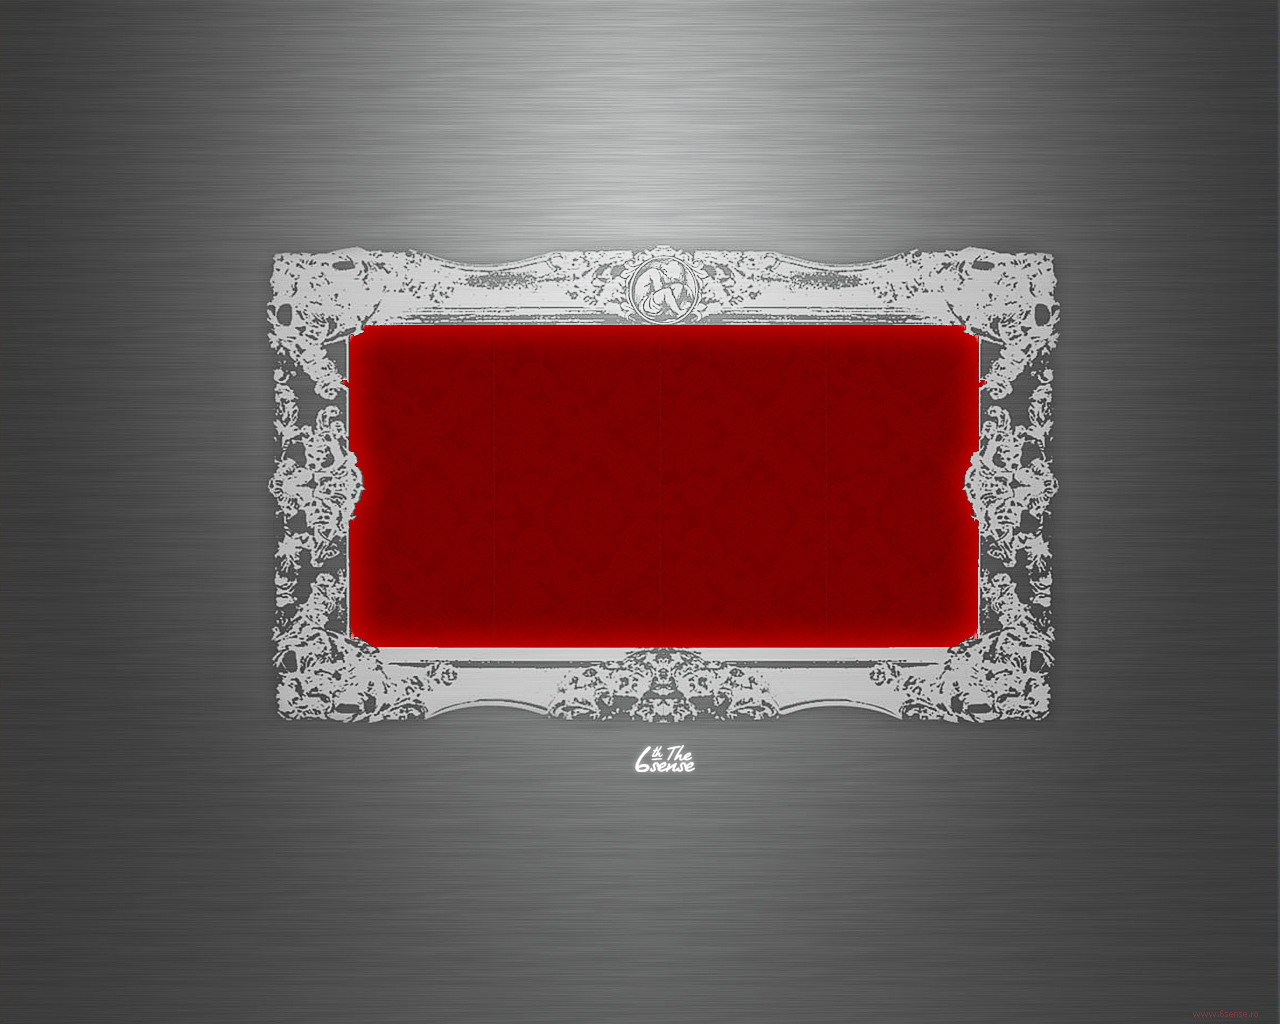 Red painting wallpaper. Red painting